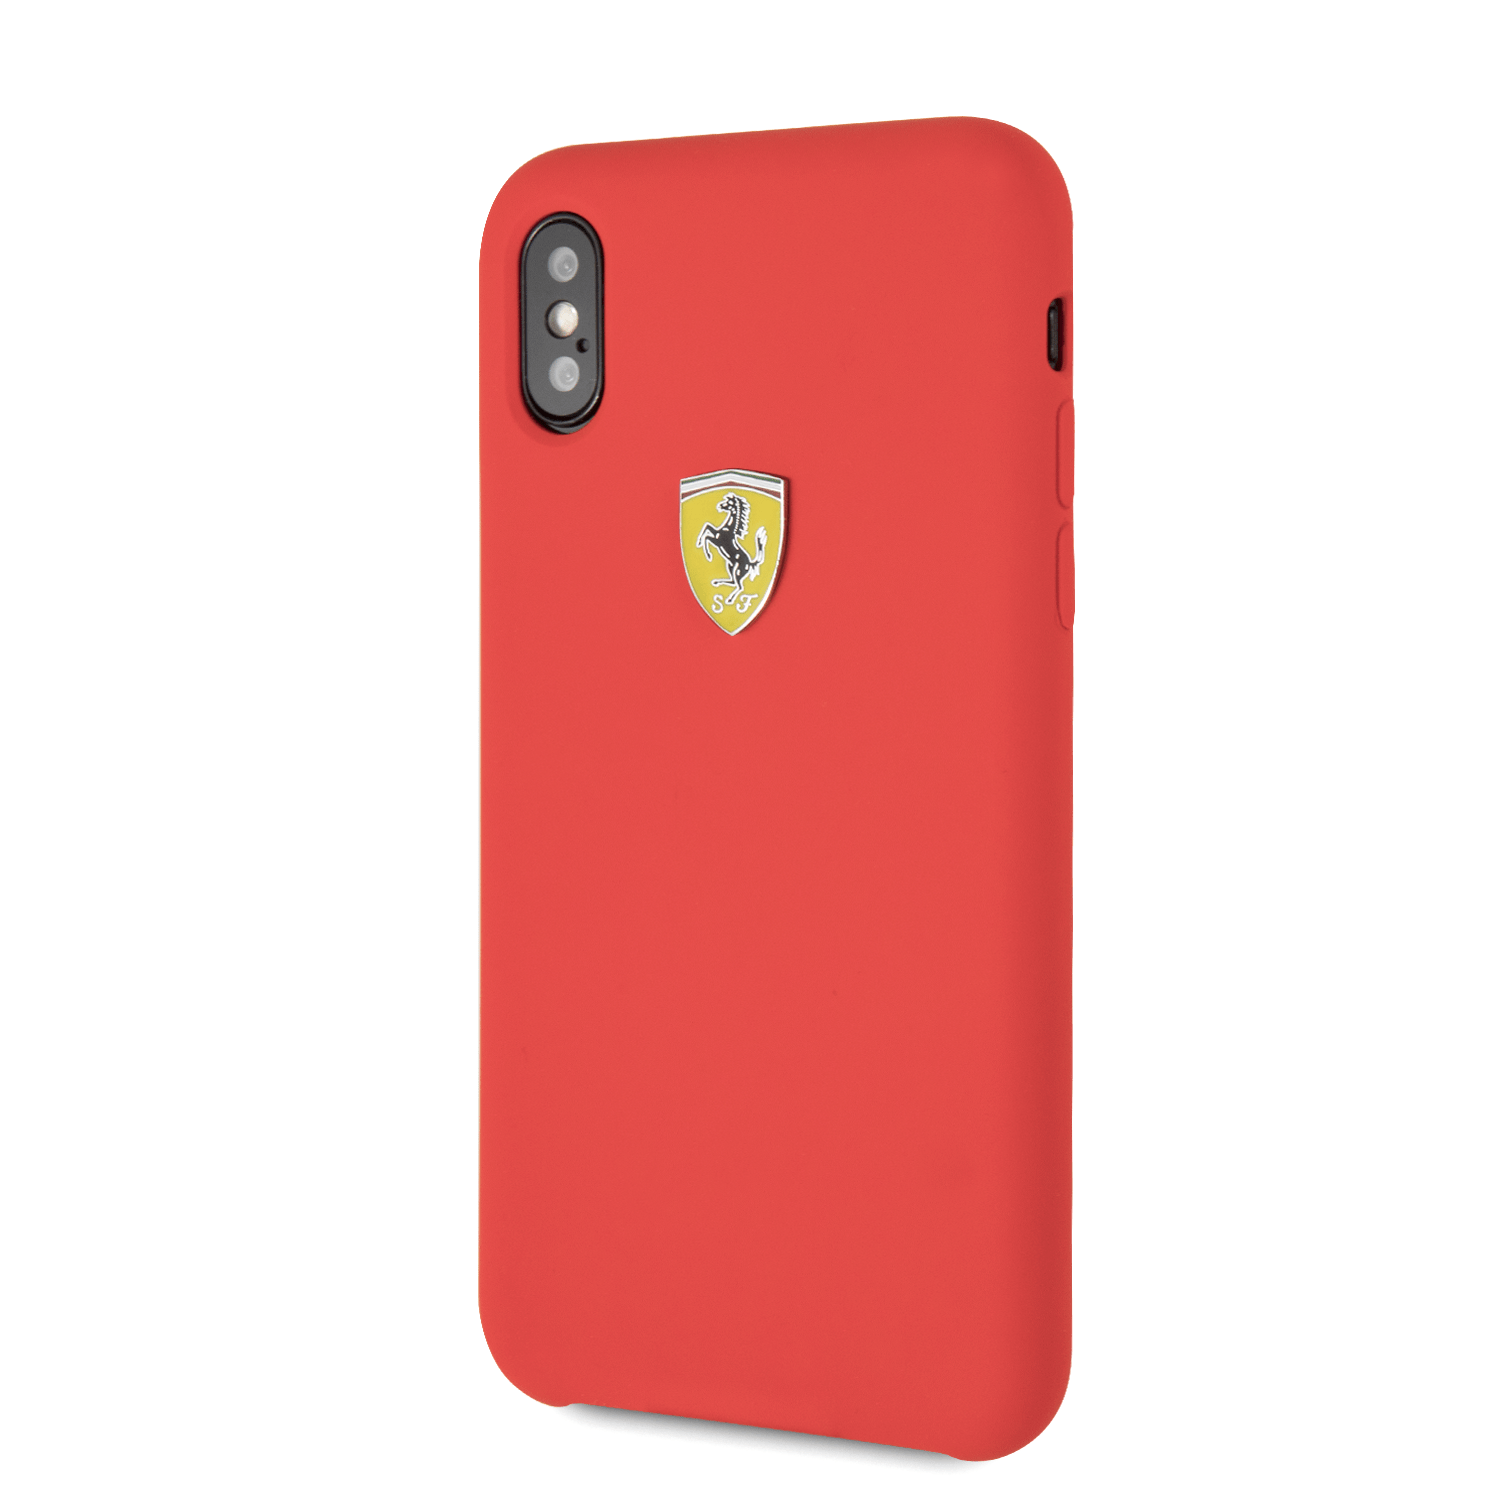 Ferrari Soft Slim Case for iPhone X and XS, combining sleek design with premium protection